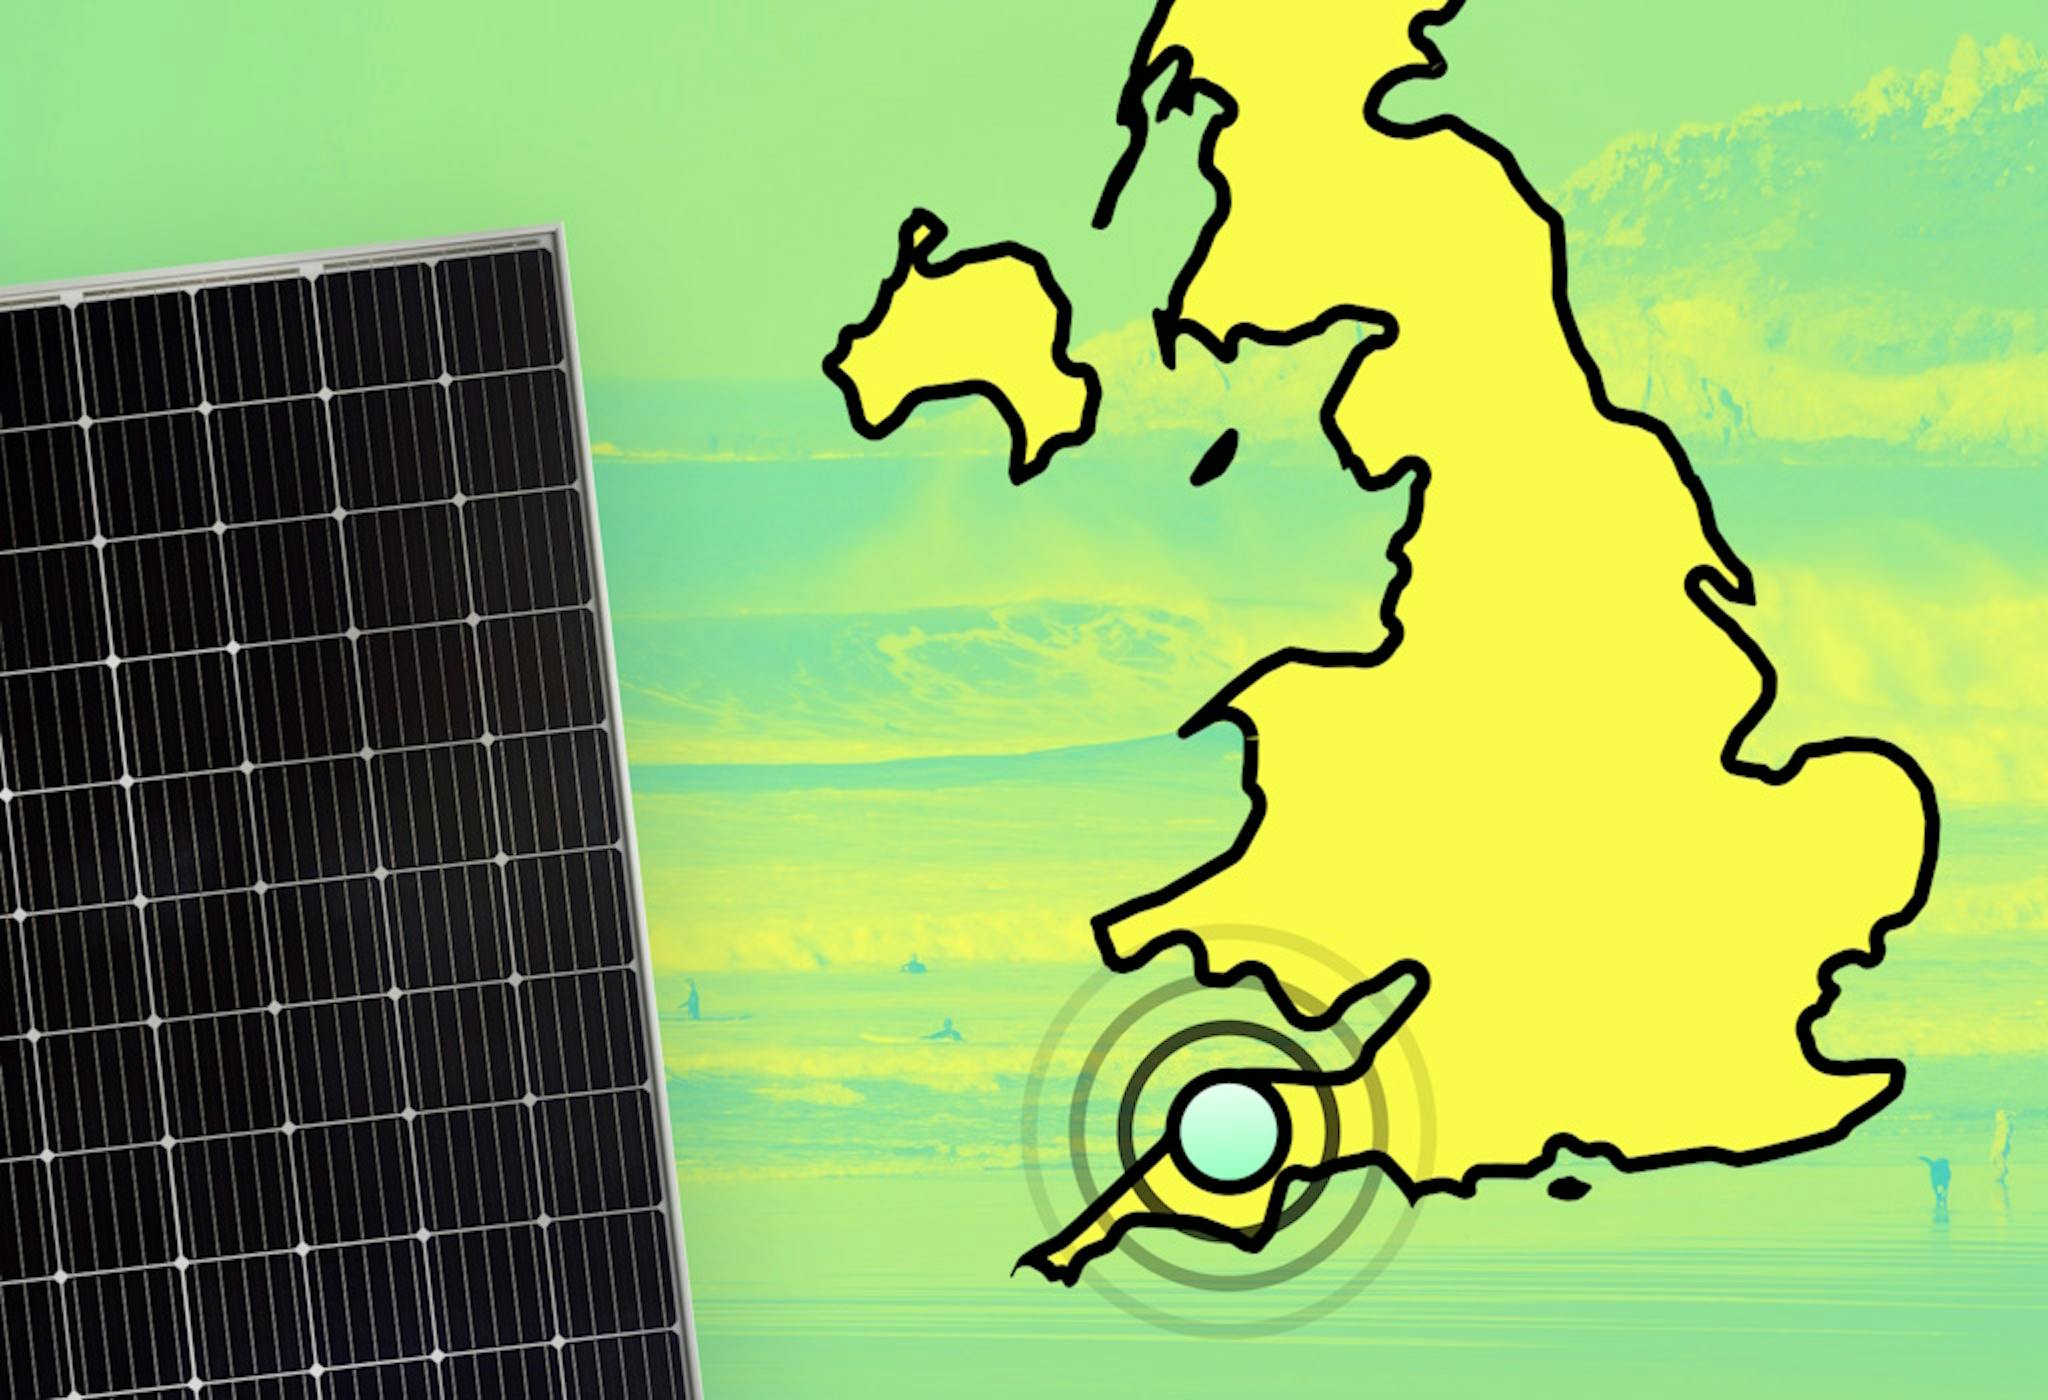 A graphic that has a cut-off map of the United Kingdom on the right with concentric circles emanating from Devon, and a photo of a black solar panel on the left. The UK is yellow and outlined in black, and the background of the image is a photo of a Devon beach